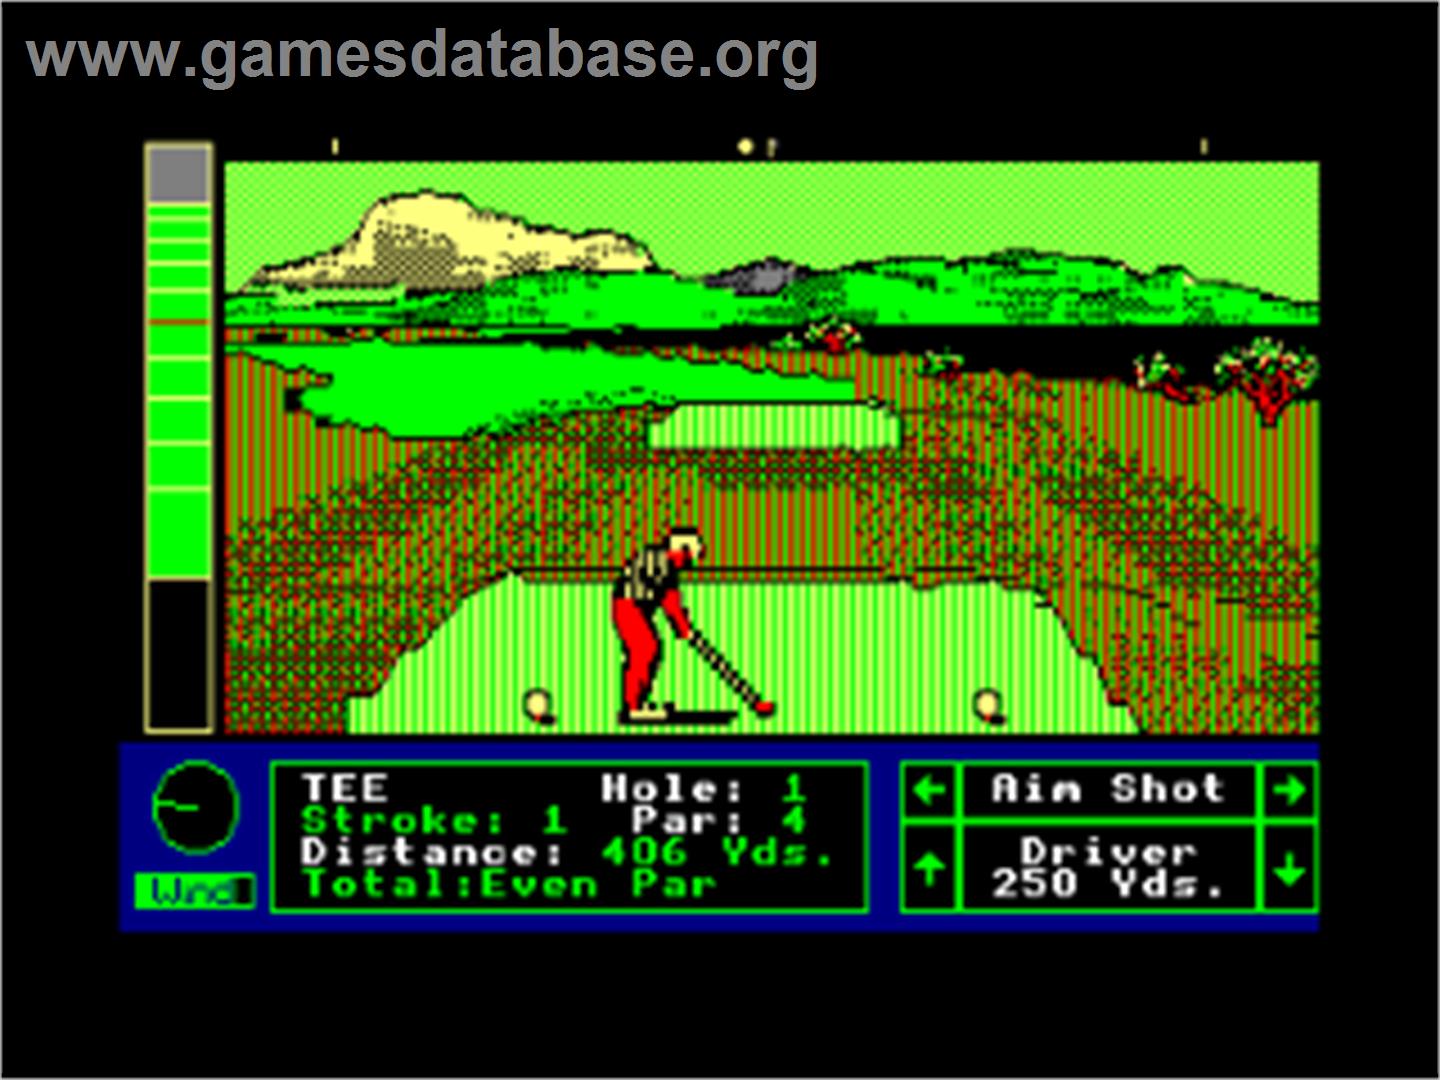 Jack Nicklaus' Greatest 18 Holes of Major Championship Golf - Amstrad CPC - Artwork - In Game